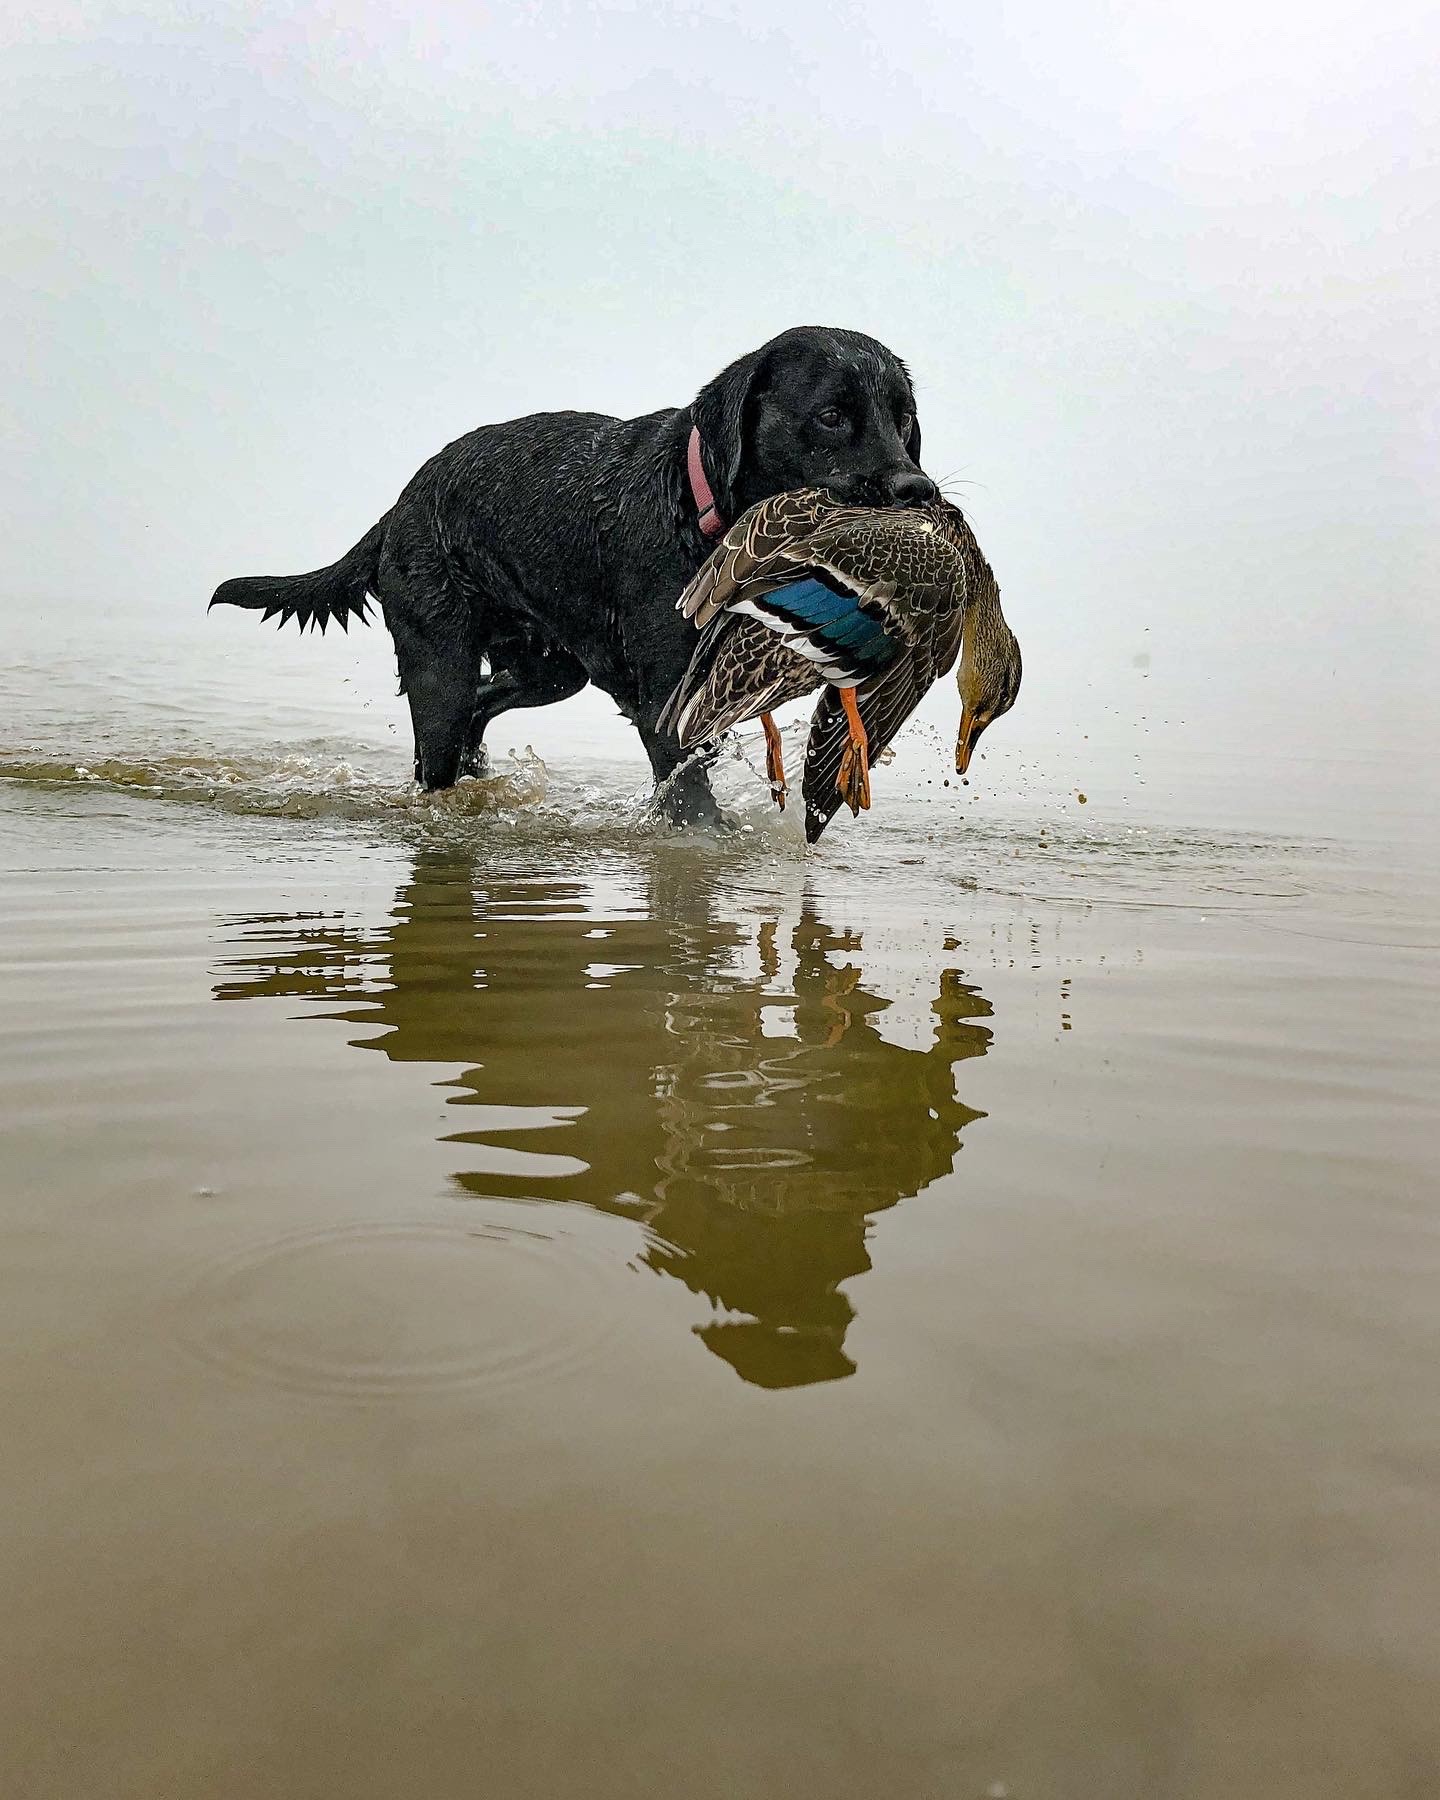 BBcsiJULY 4 taking duck dogs hunting at public wetlands and watching them successfully retrieve our ducks is something we value immensely credit Conor Carlaw